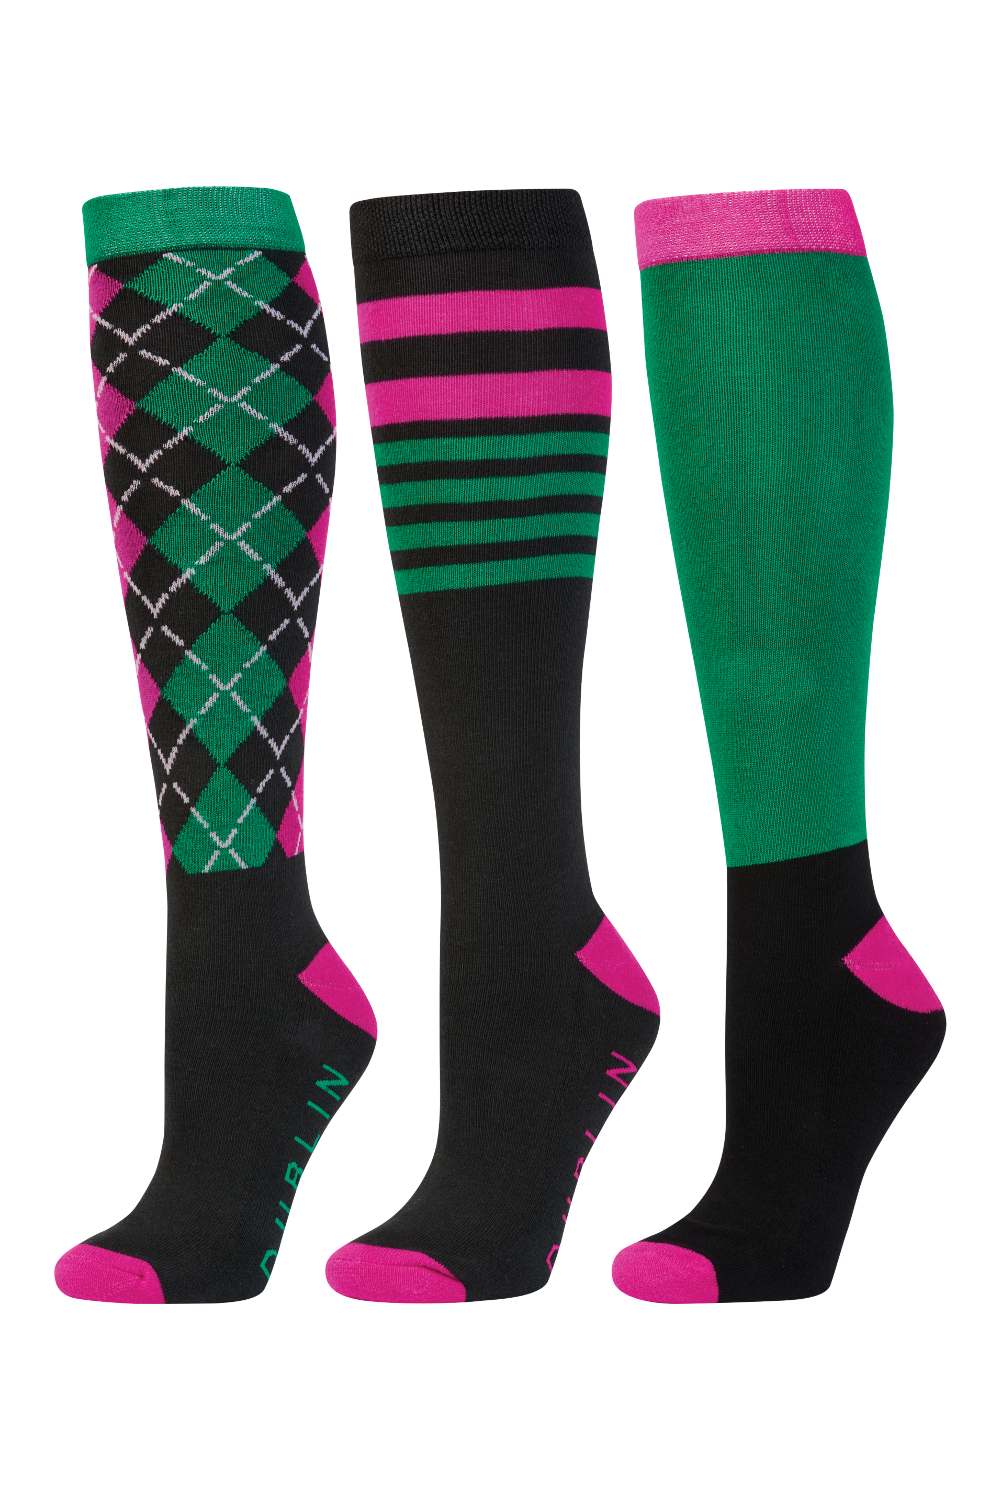 Dublin 3 Pack Adults One Size Socks in Emerald Argyle  